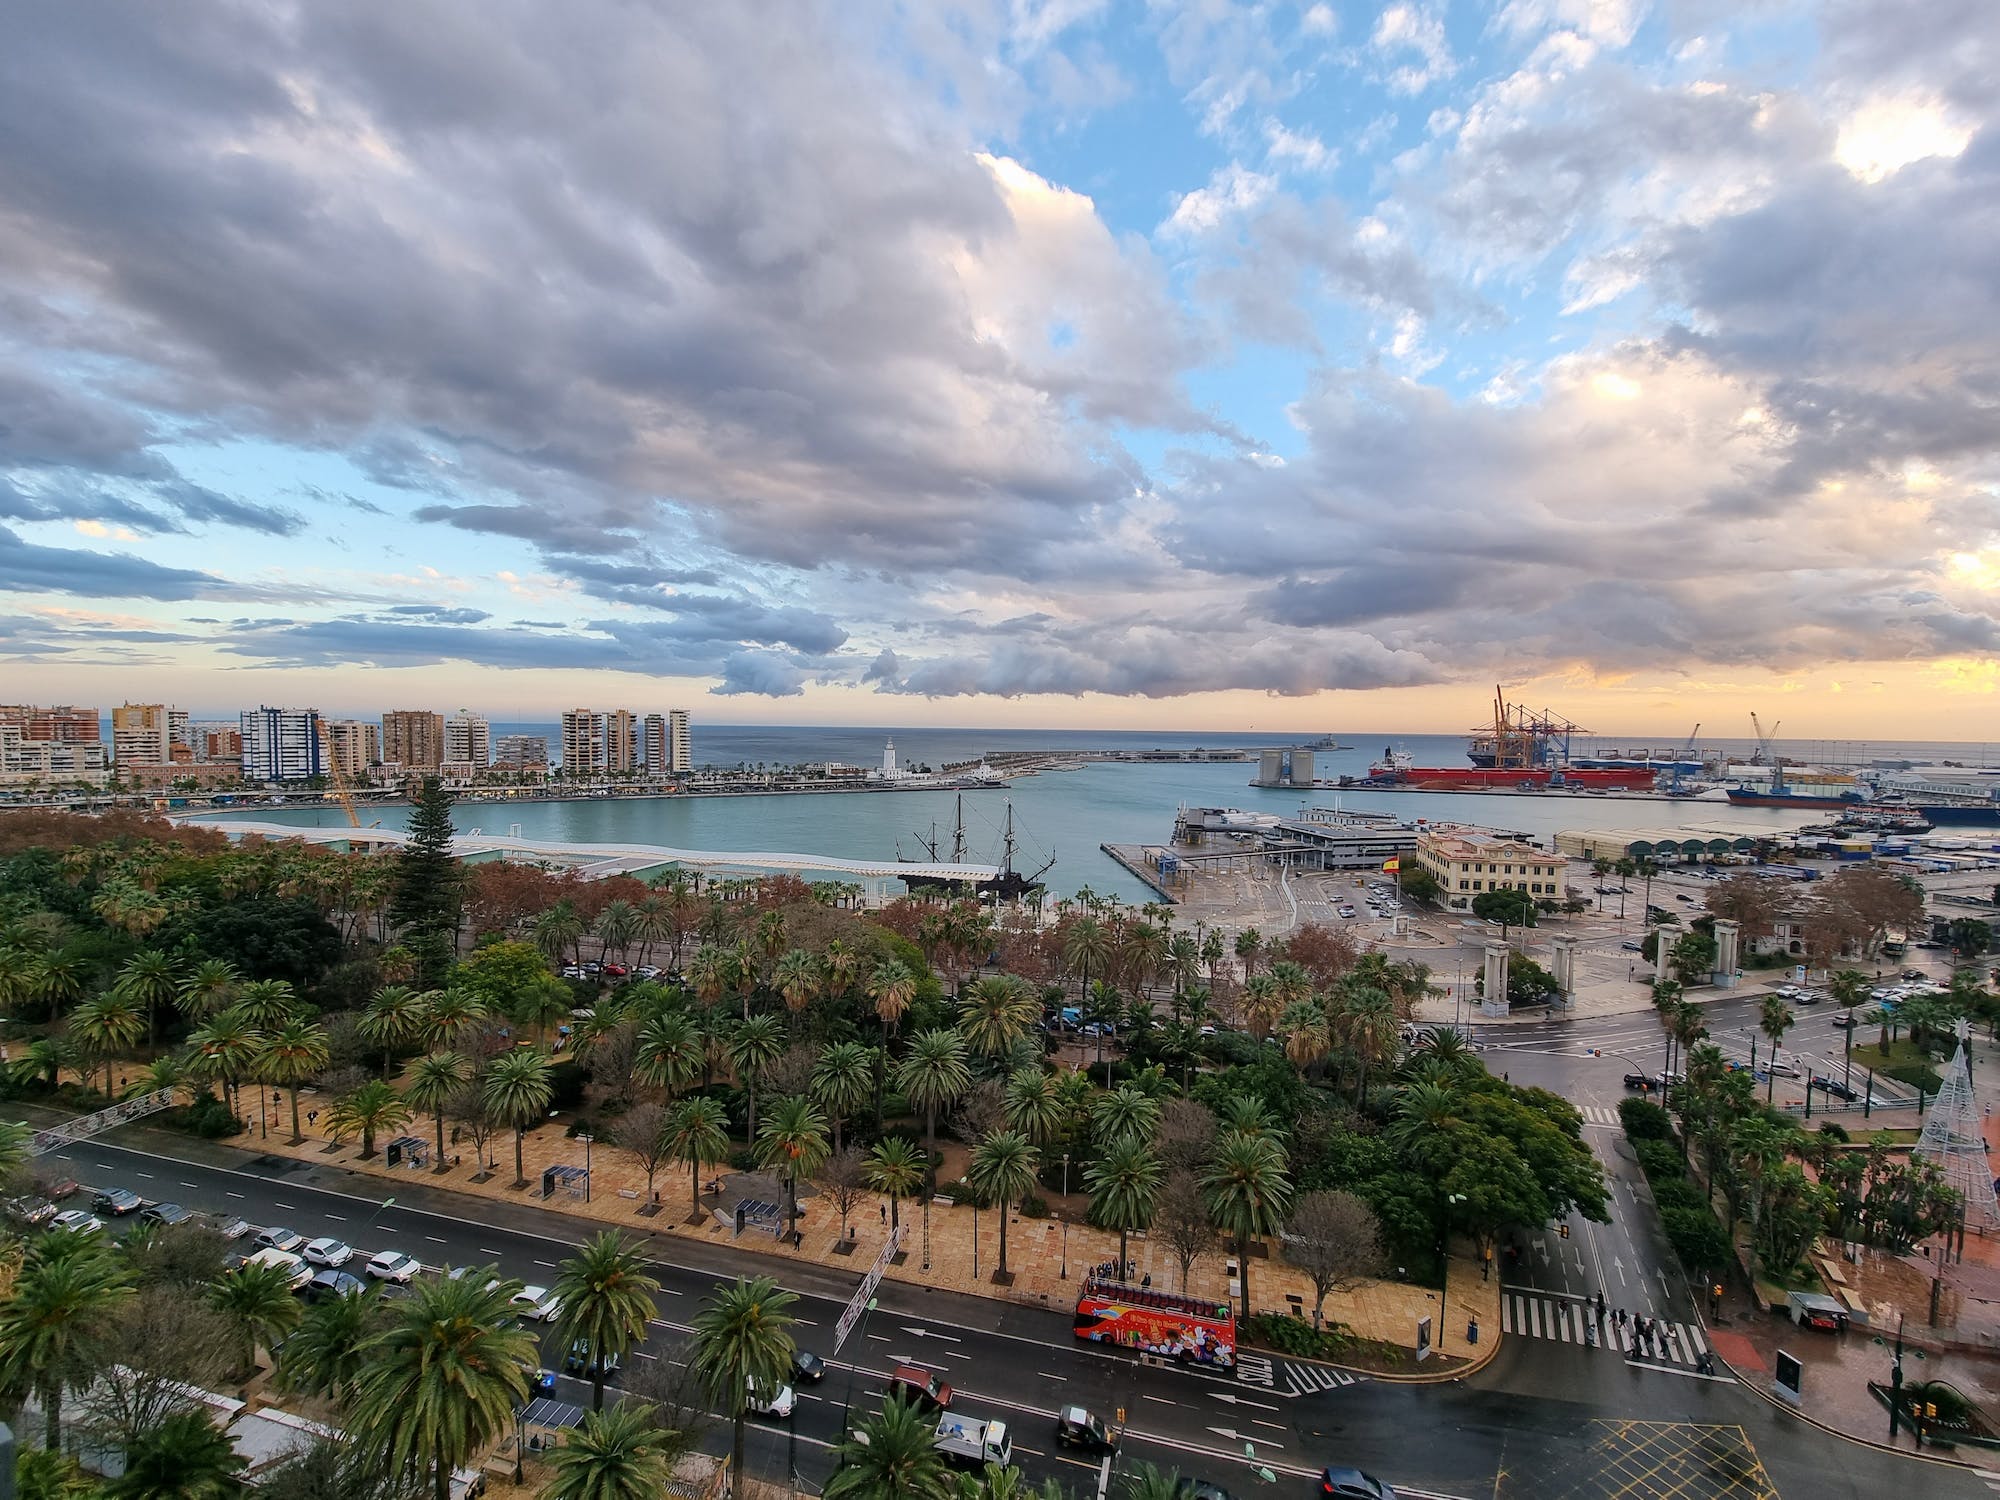 A view overlooking the Port in Malaga, there are clouds in the sky but it is a sunny day.